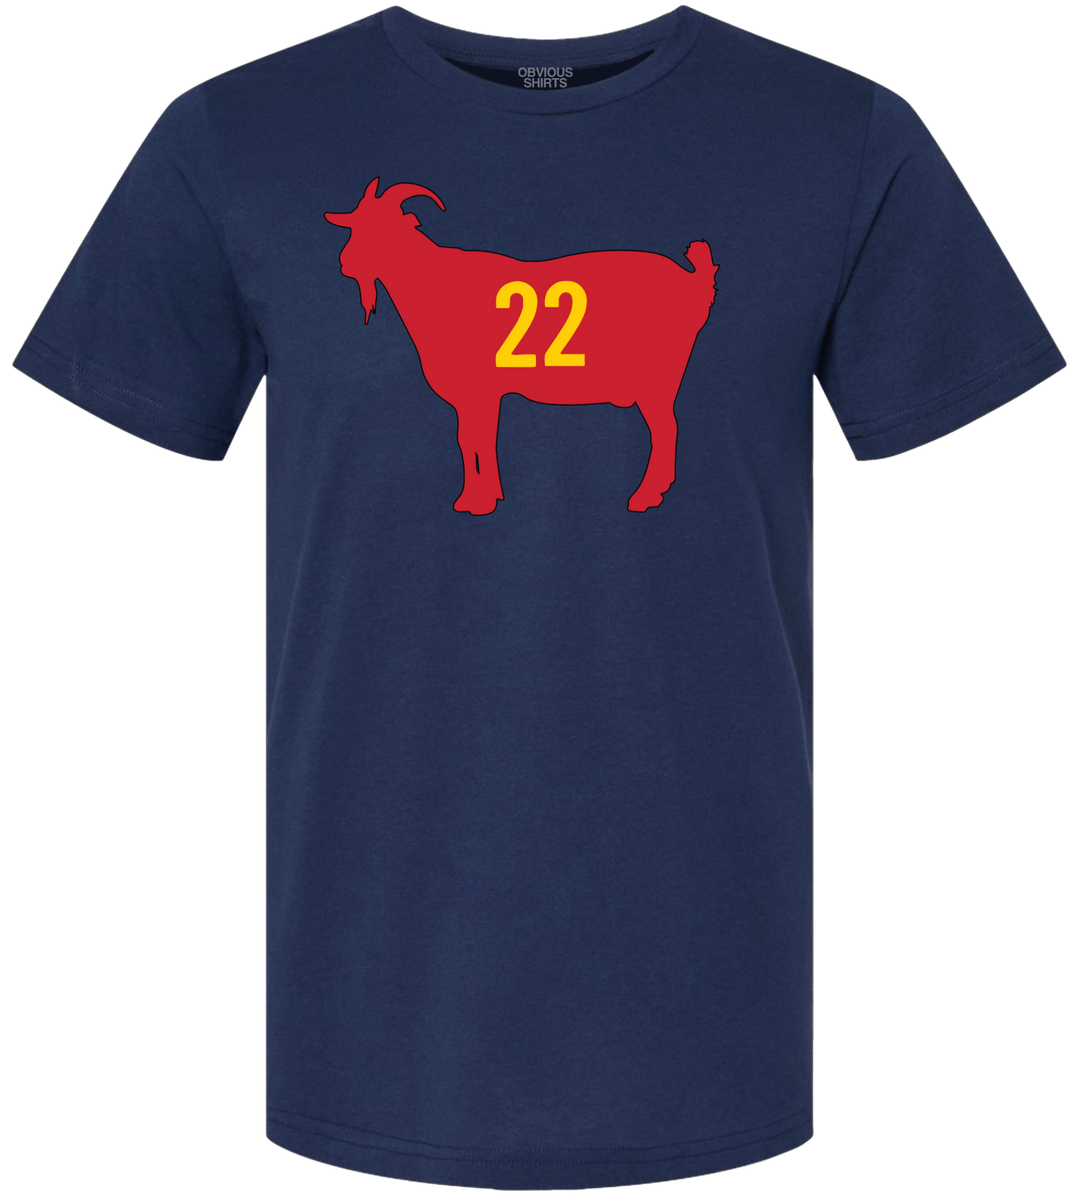 INDIANA'S GOAT 22 - OBVIOUS SHIRTS